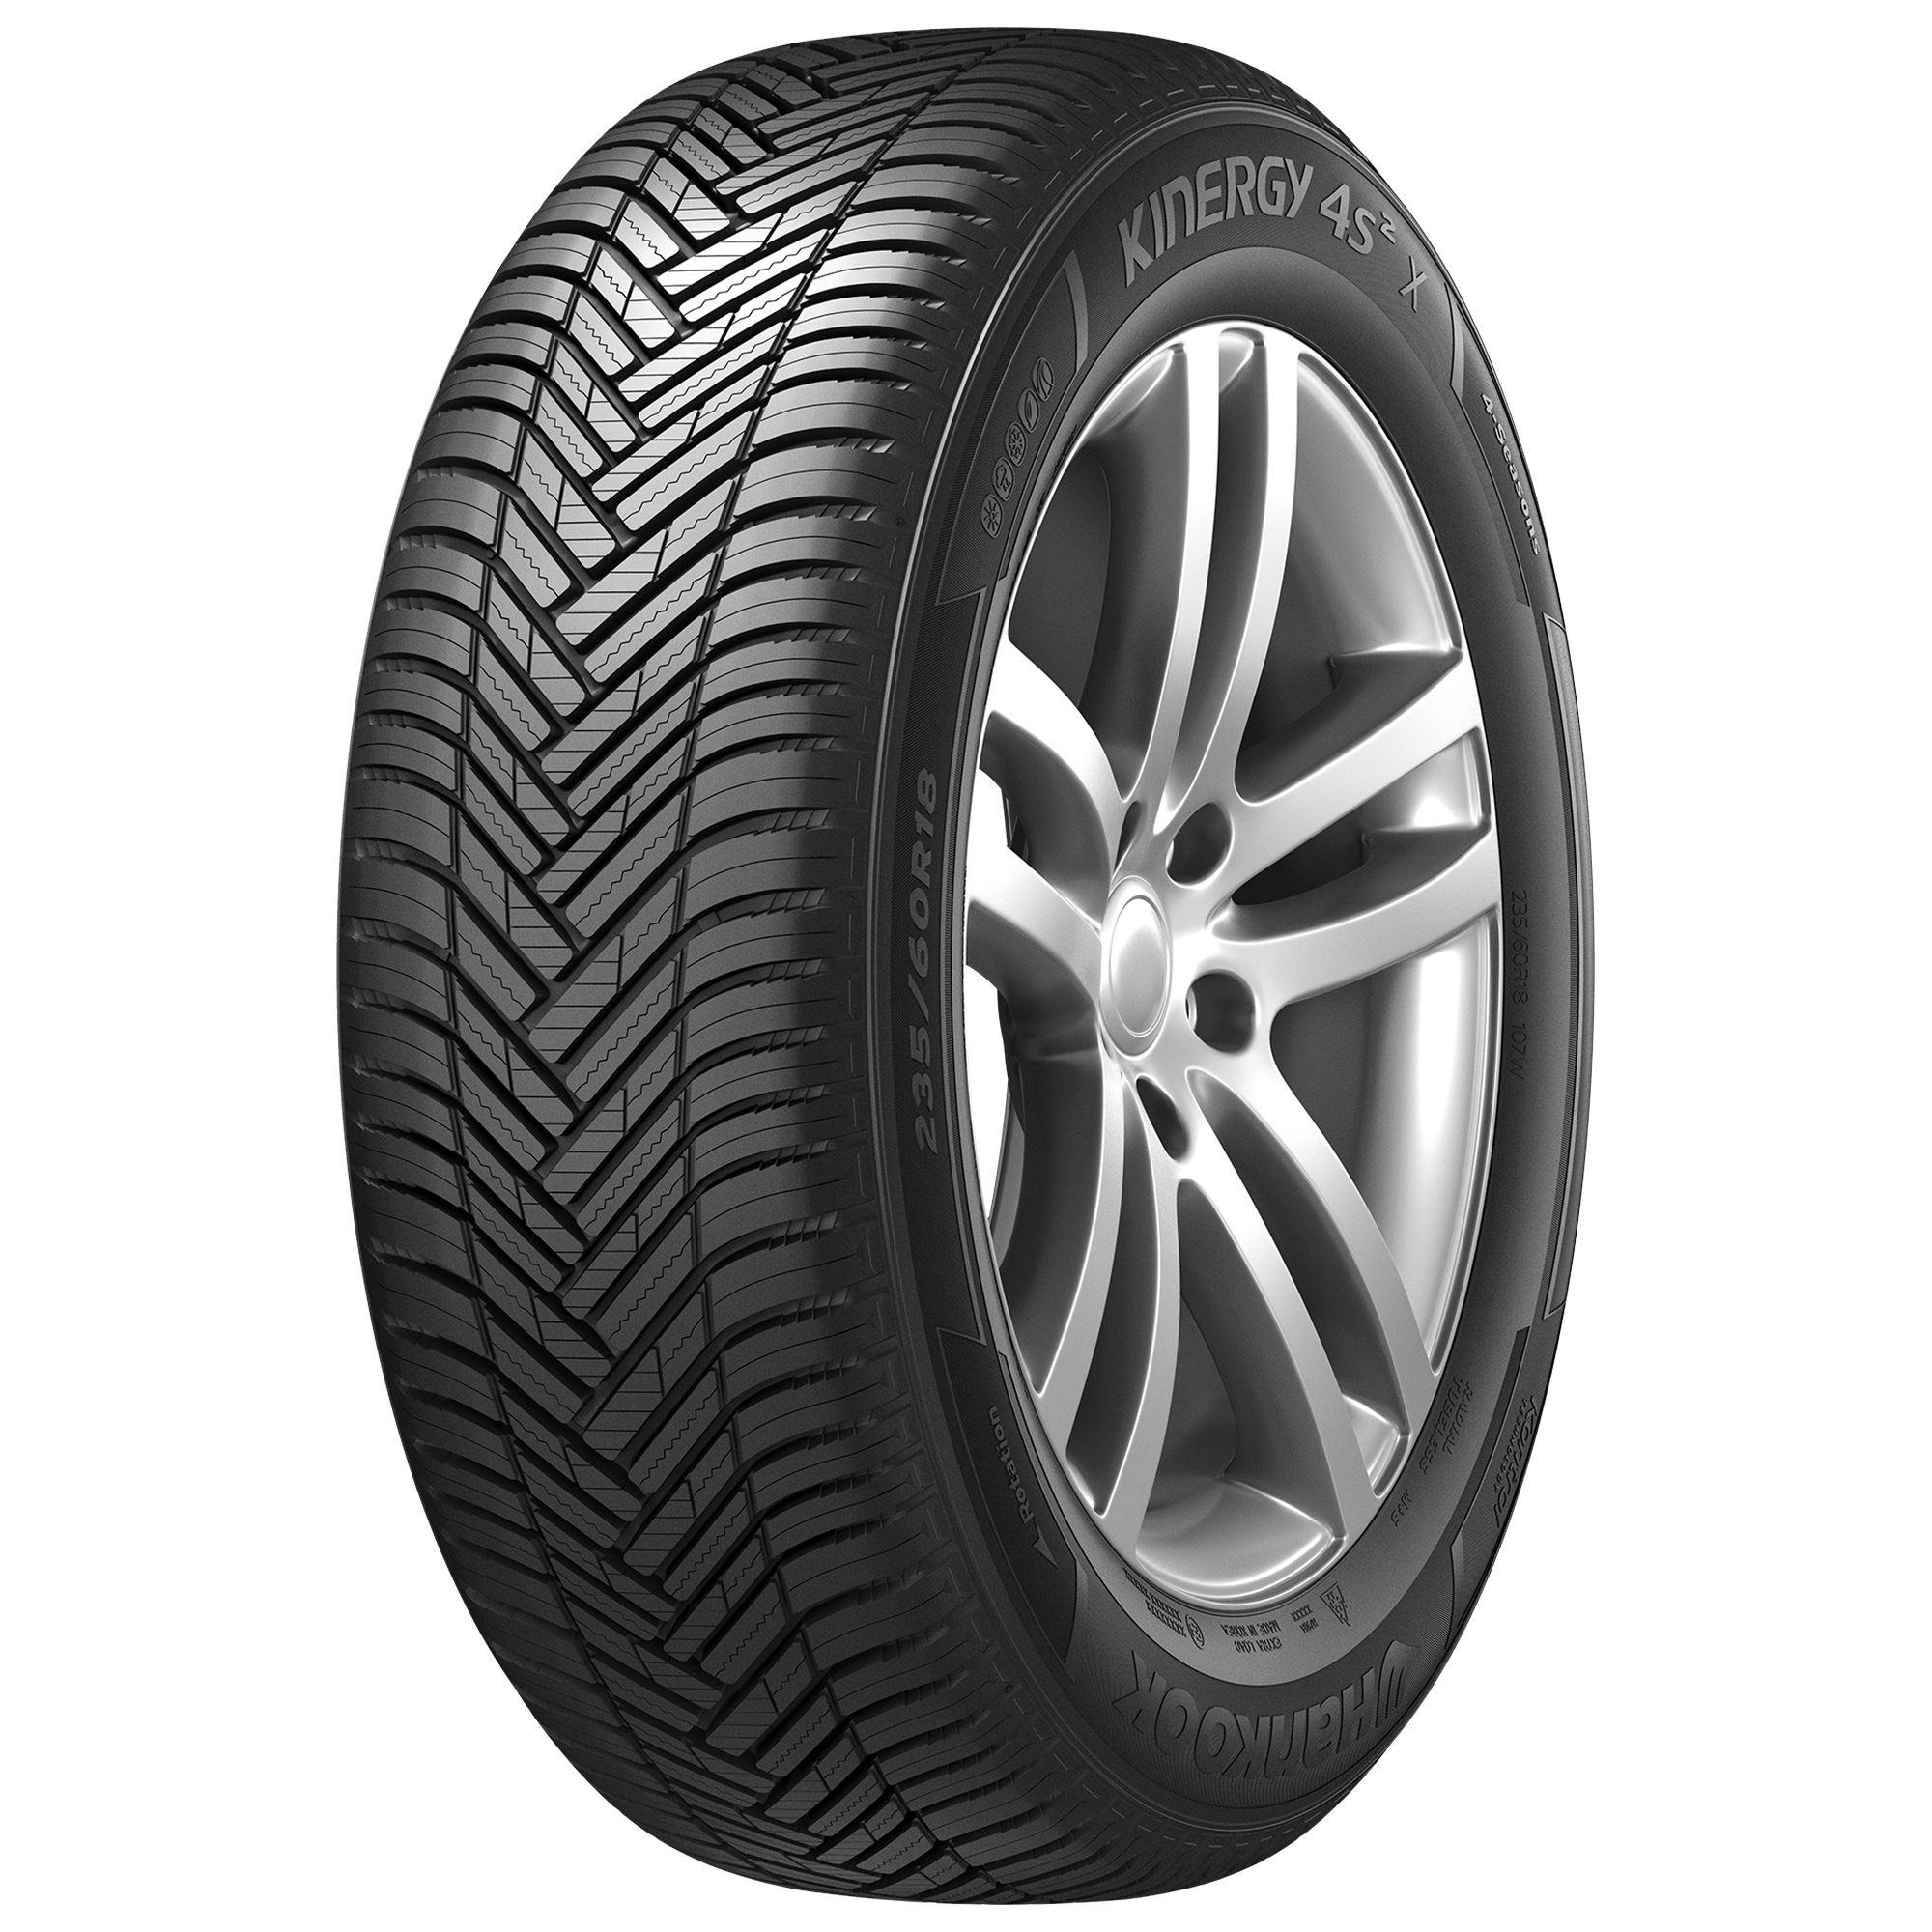 HANKOOK KINERGY 4S 2 X (H750A) 255/50R19 107W BSW